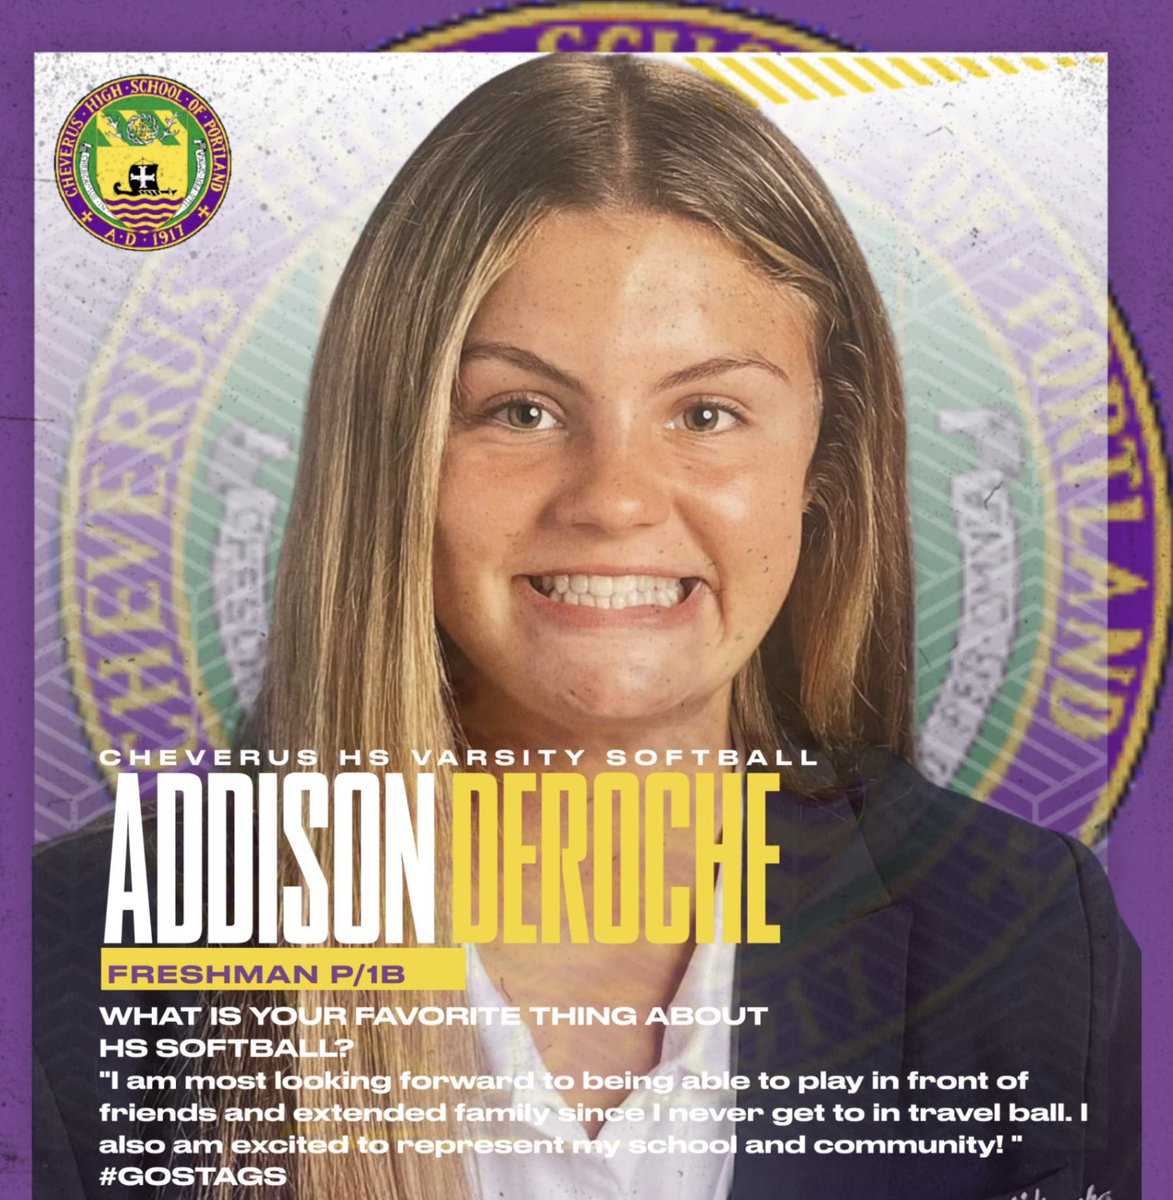 🌟School Ball Spotlight📣 Next we have 2027 @AddisonDeroche from Cheverus High School in Portland, Maine! Addison is starting her freshman campaign soon and we know she is ready to make a statement in the circle! Good luck, Addi! #GoStags 💜💛 @Cheverus_Stags @BSherSB